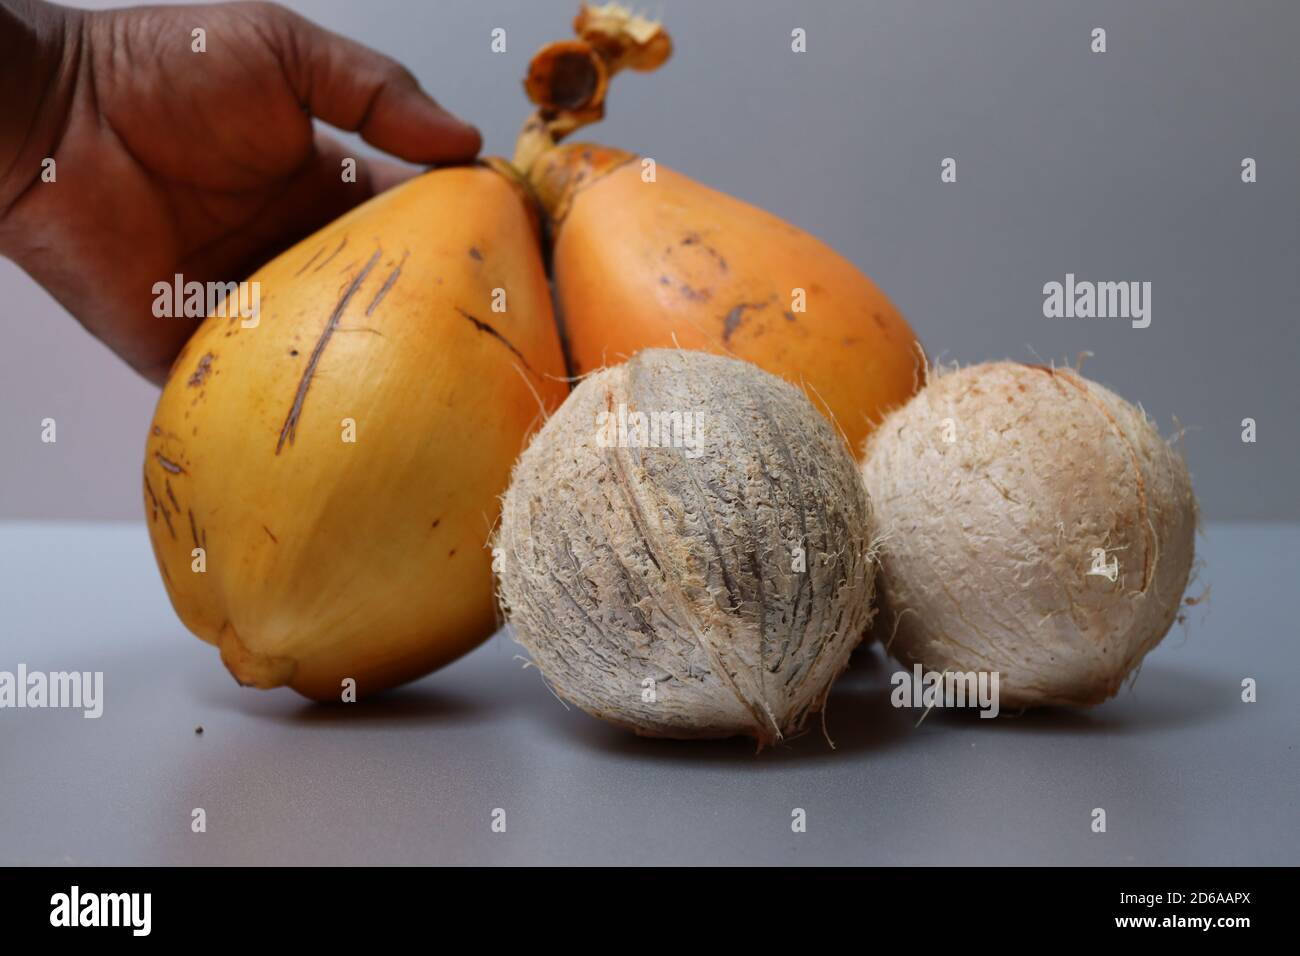 King coconut from Sri Lanka, very tasty and natural energy drink. Stock Photo